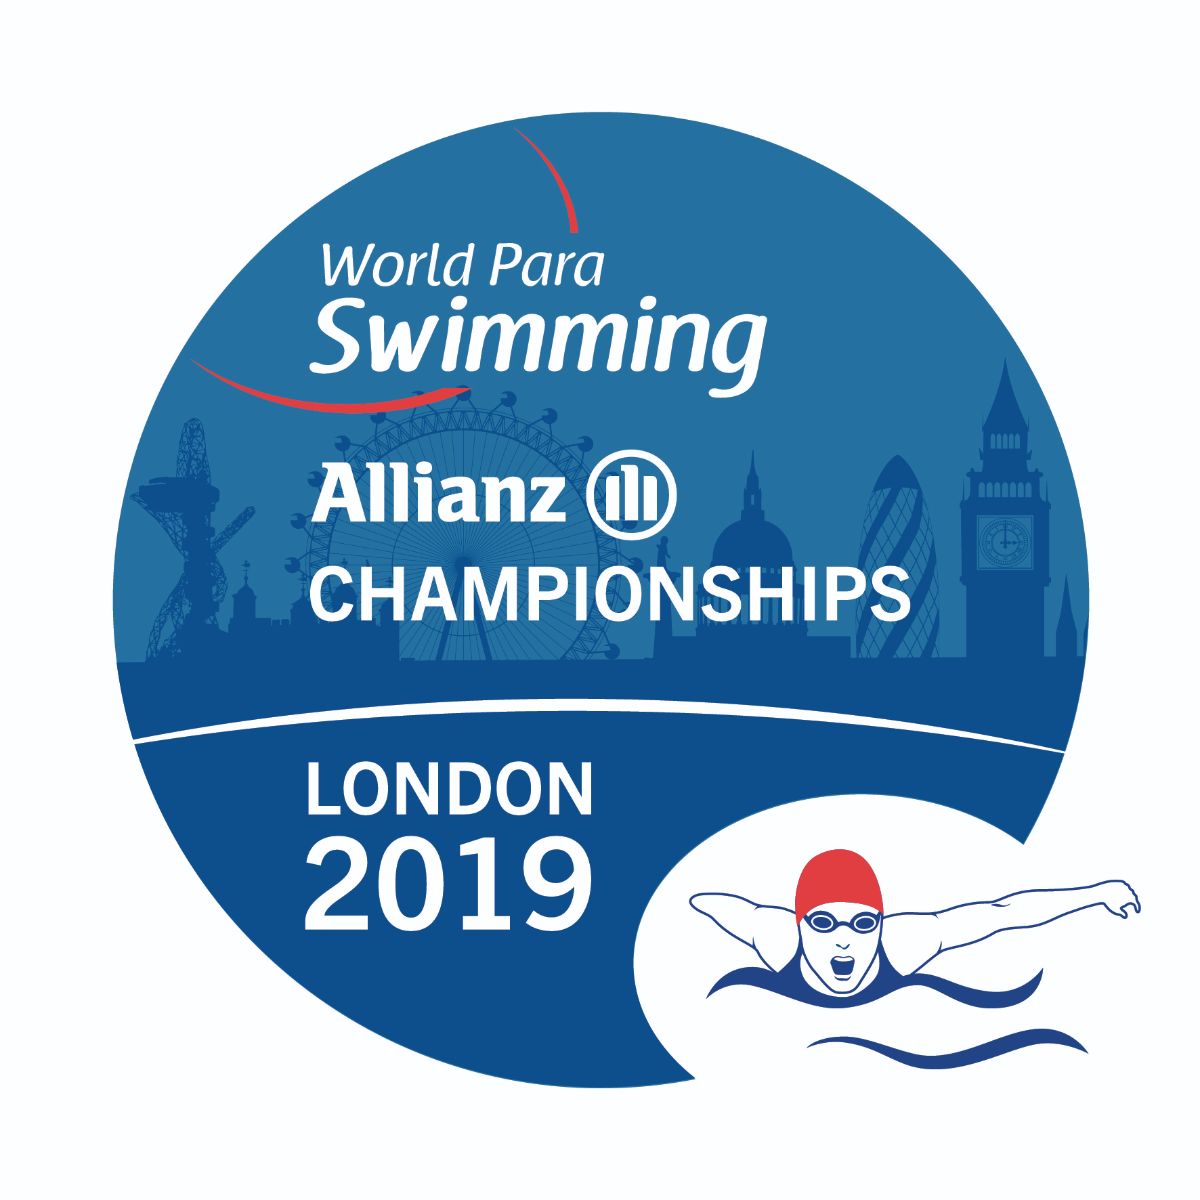 the official logo of the London 2019 World Para Swimming Championships